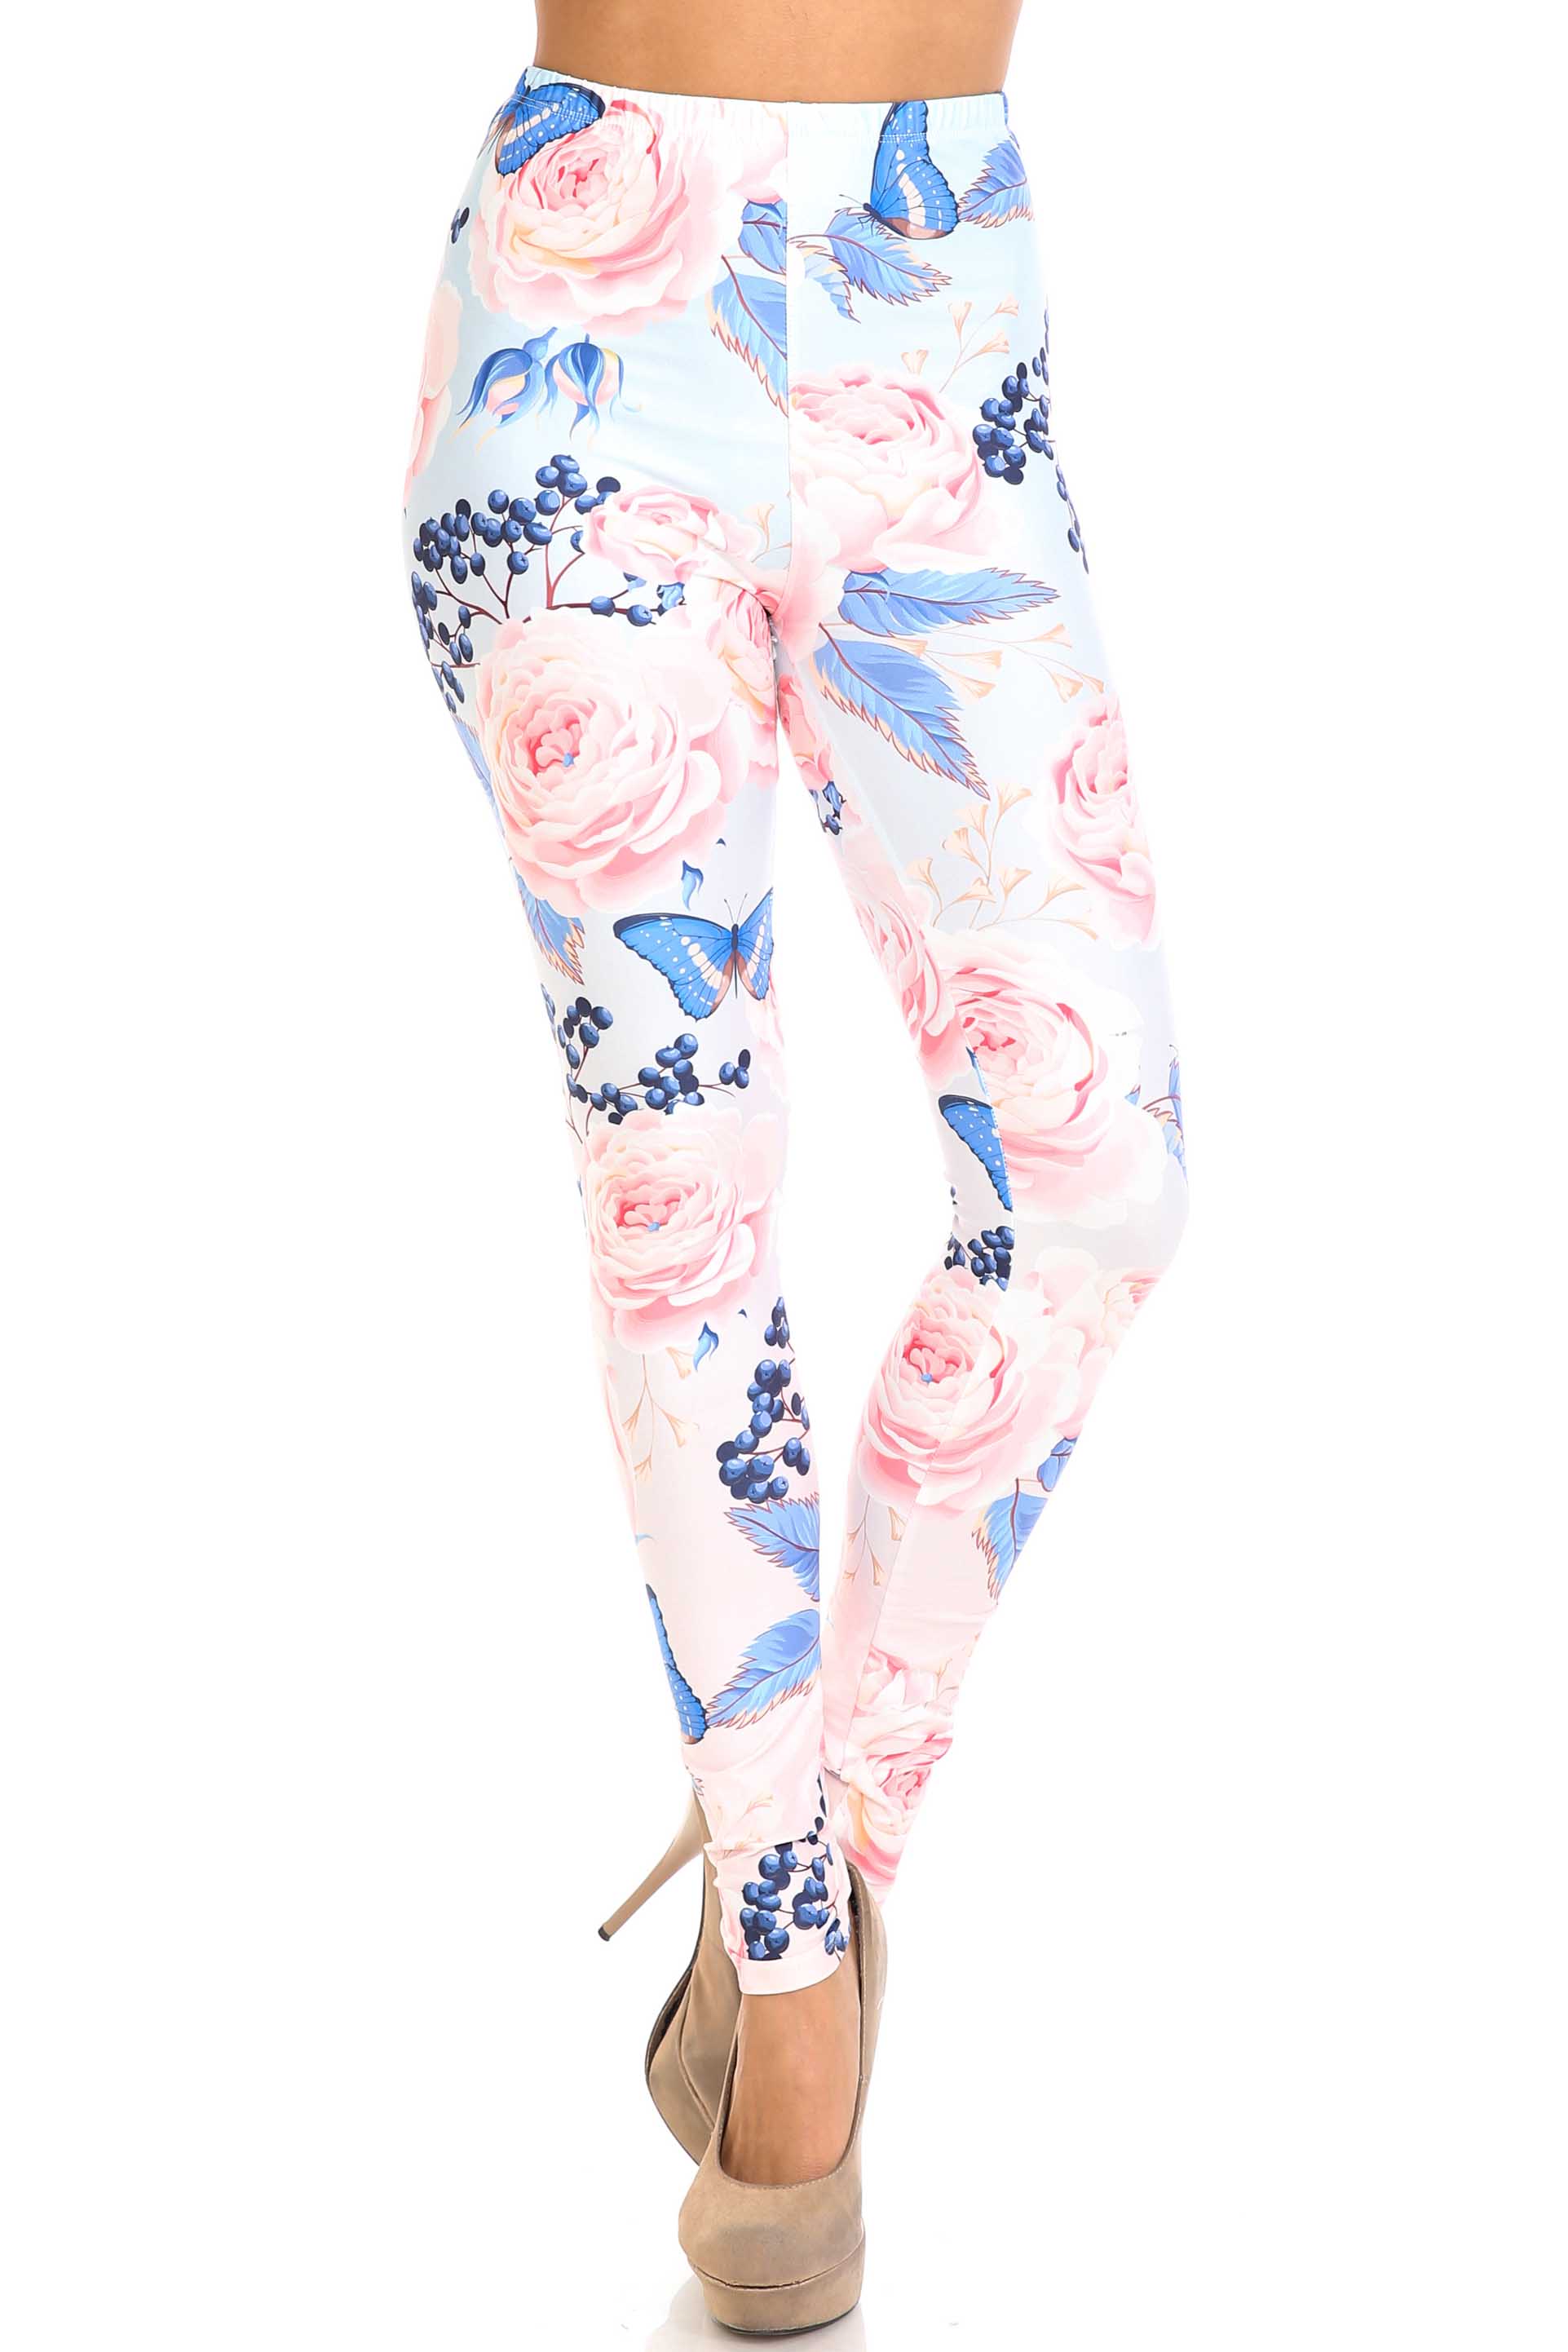 Wholesale Creamy Soft Butterflies and Jumbo Pink Roses Extra Plus Size Leggings - 3X-5X - USA Fashion™